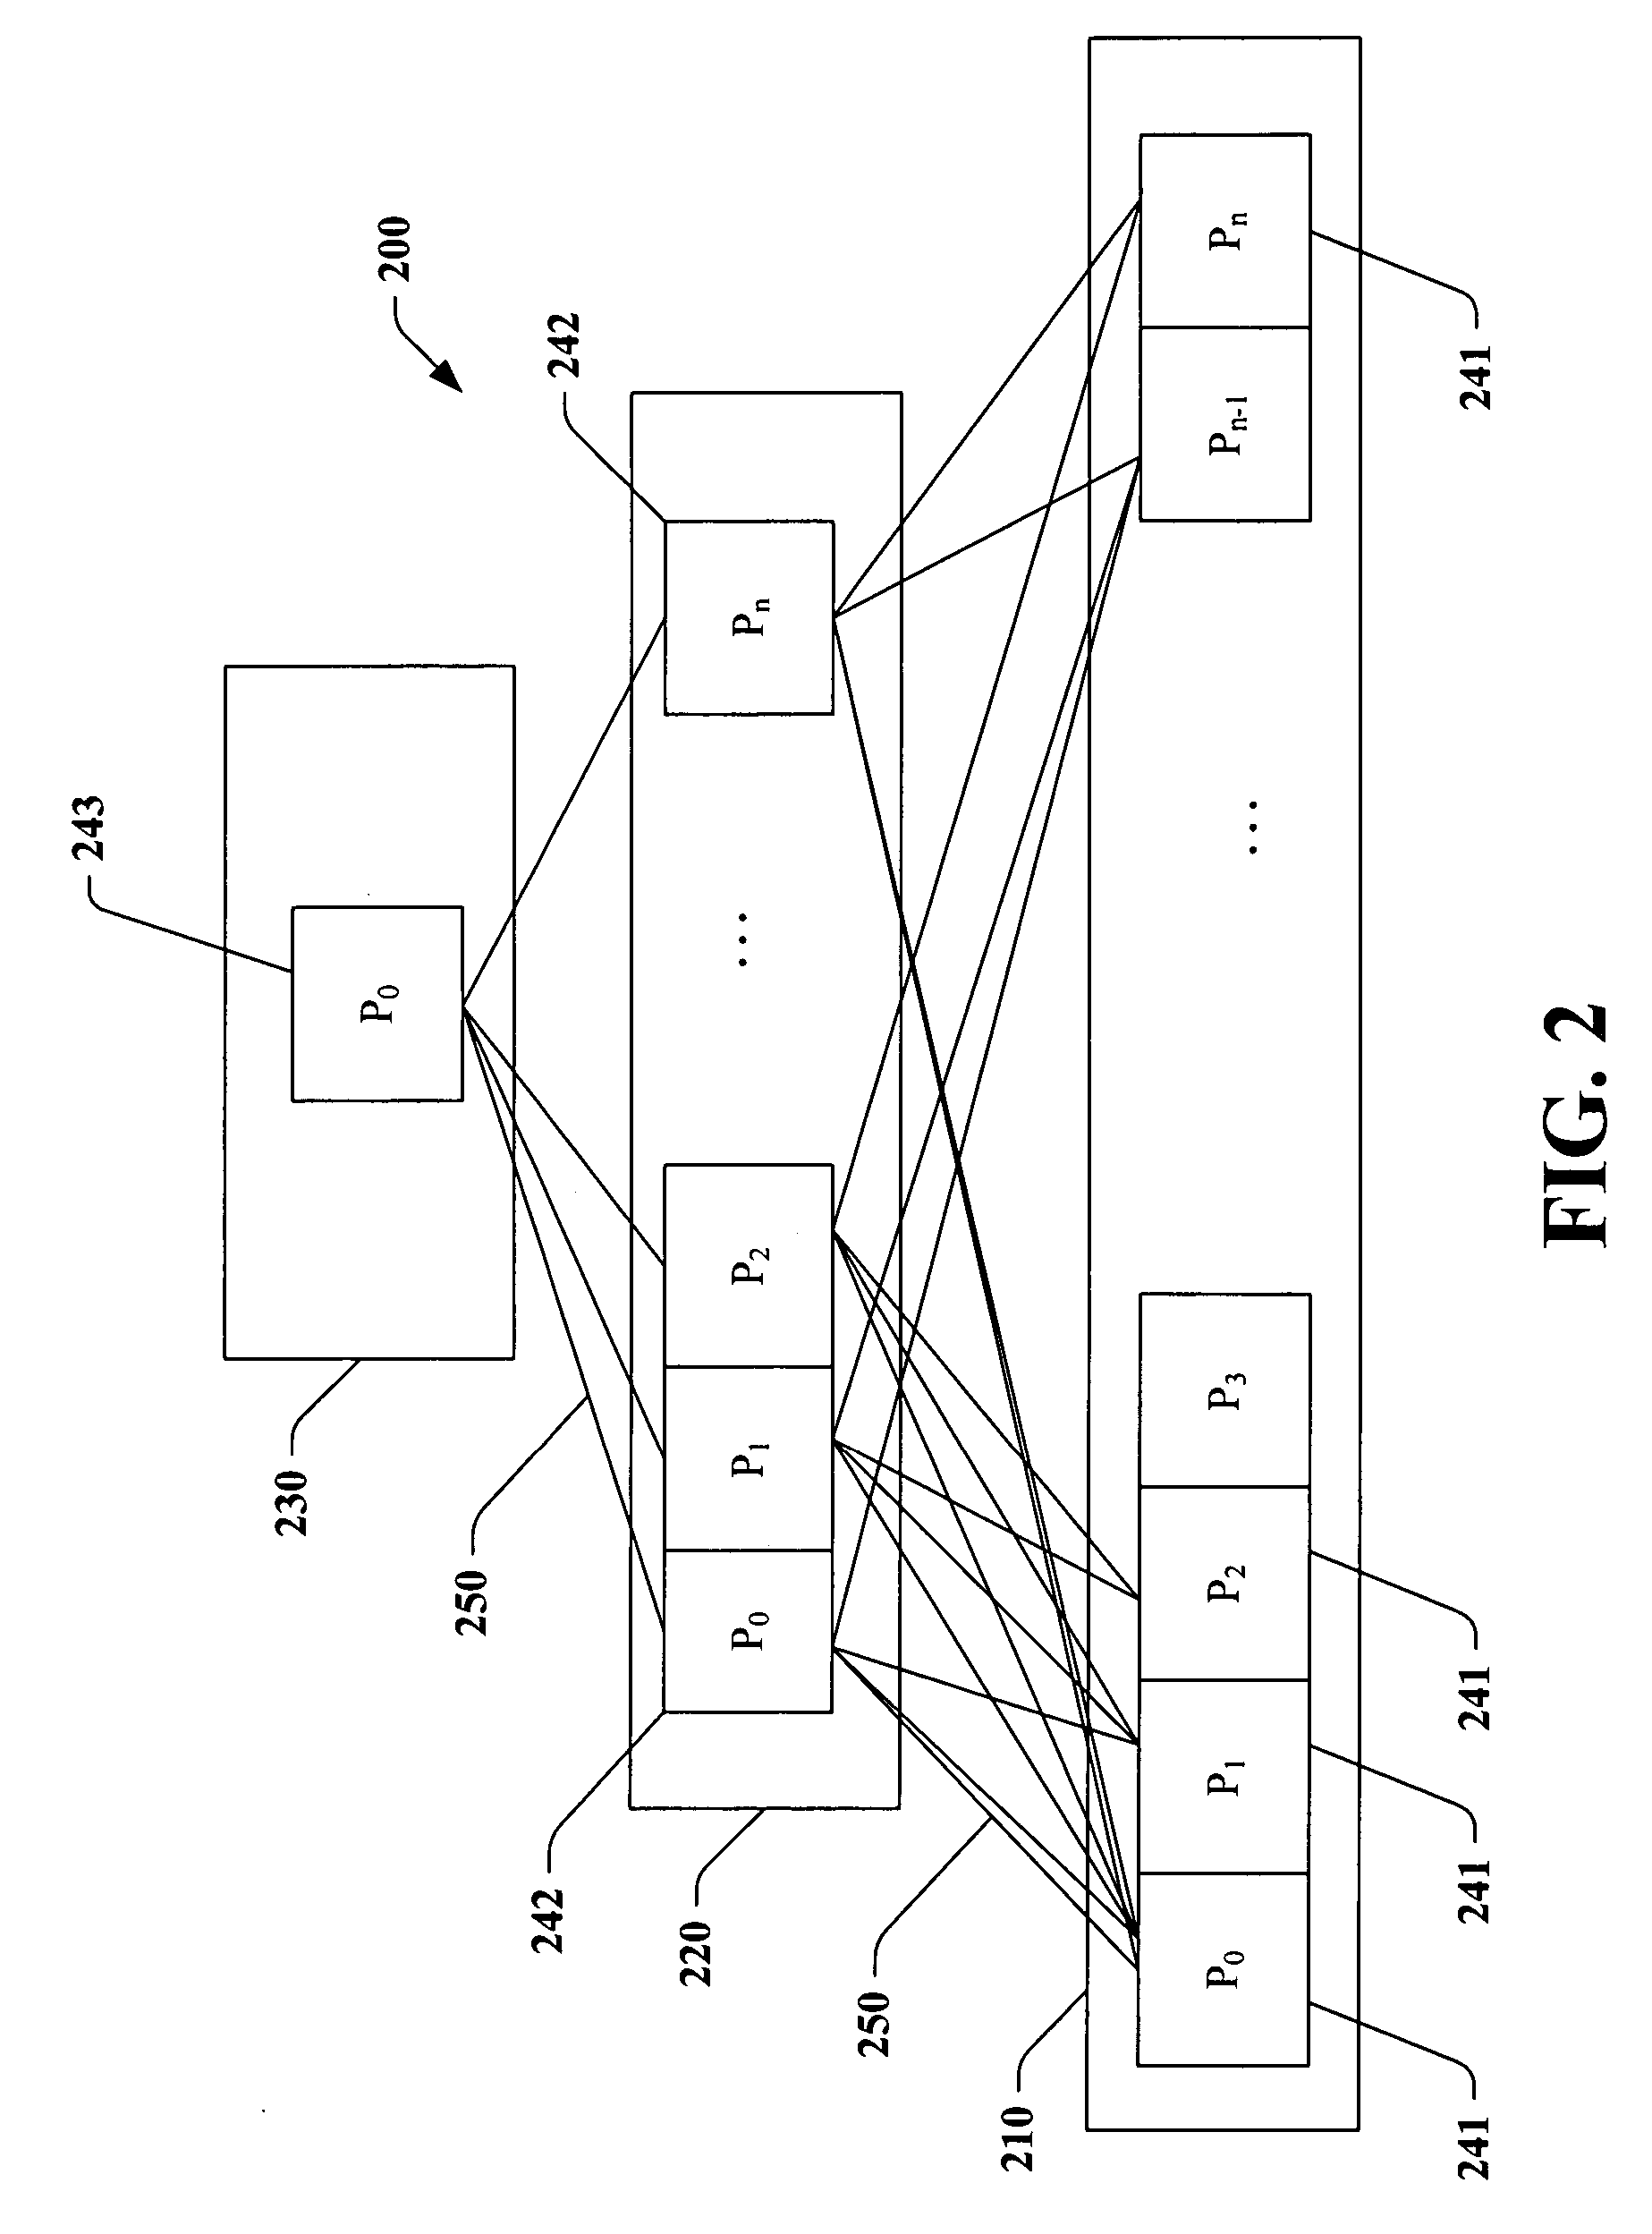 System and method for learning ranking functions on data